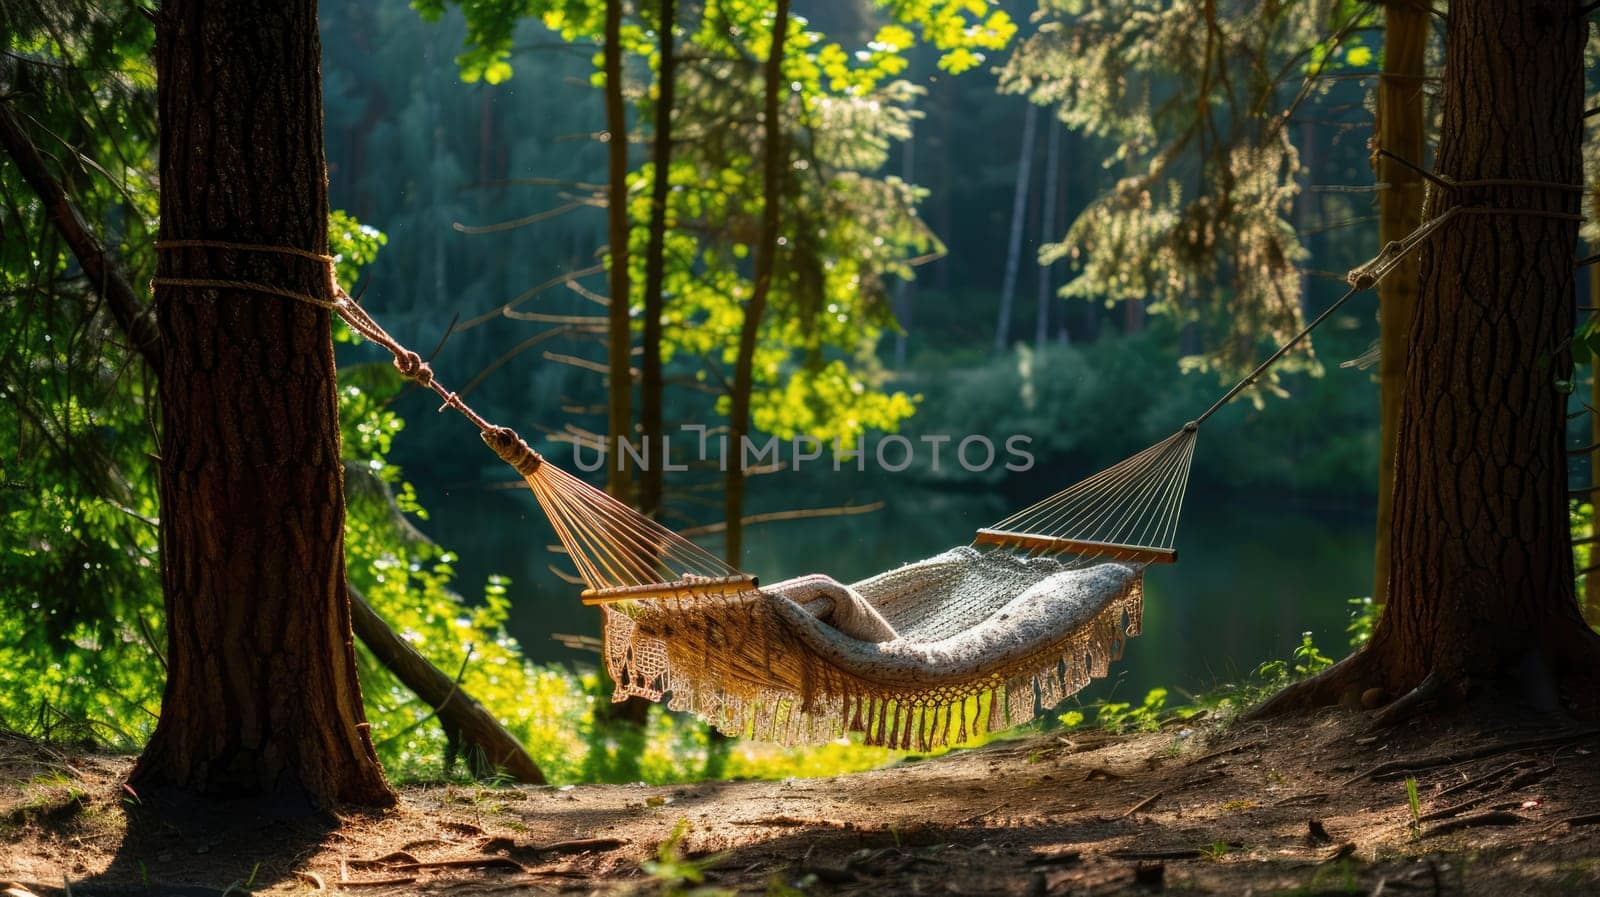 Hammock for a cozy rest in the shade of trees by natali_brill